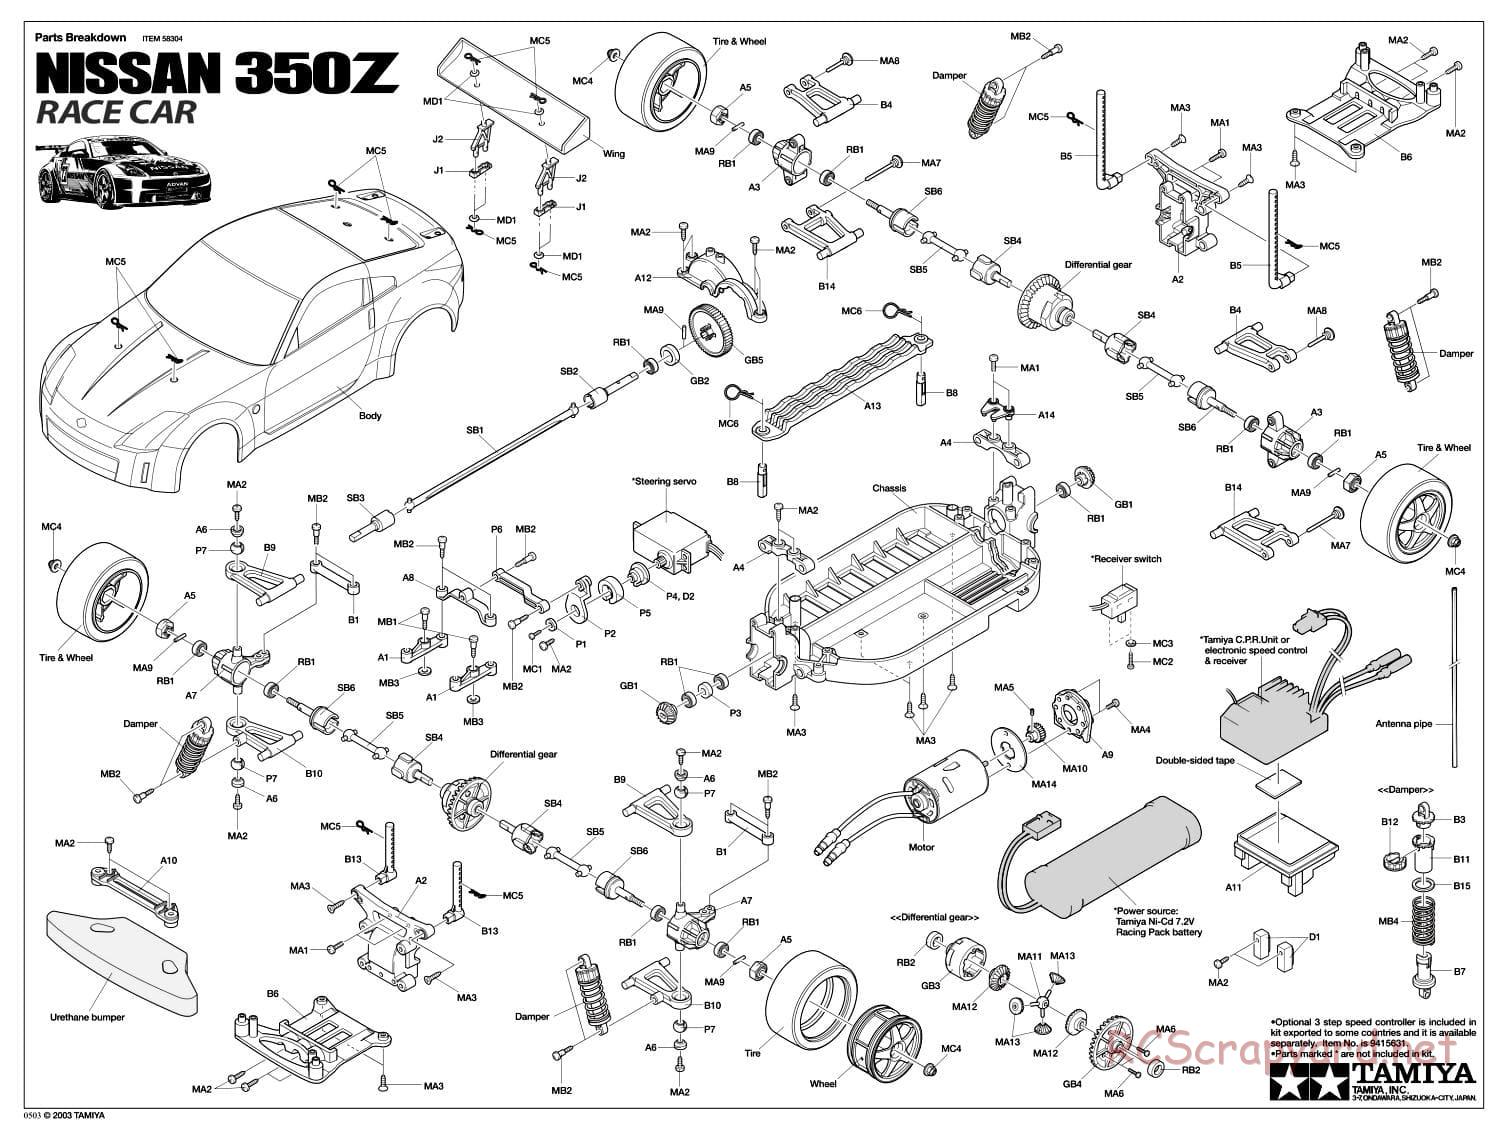 Tamiya - Nissan 350Z Race-Car - TT-01 Chassis - Exploded View